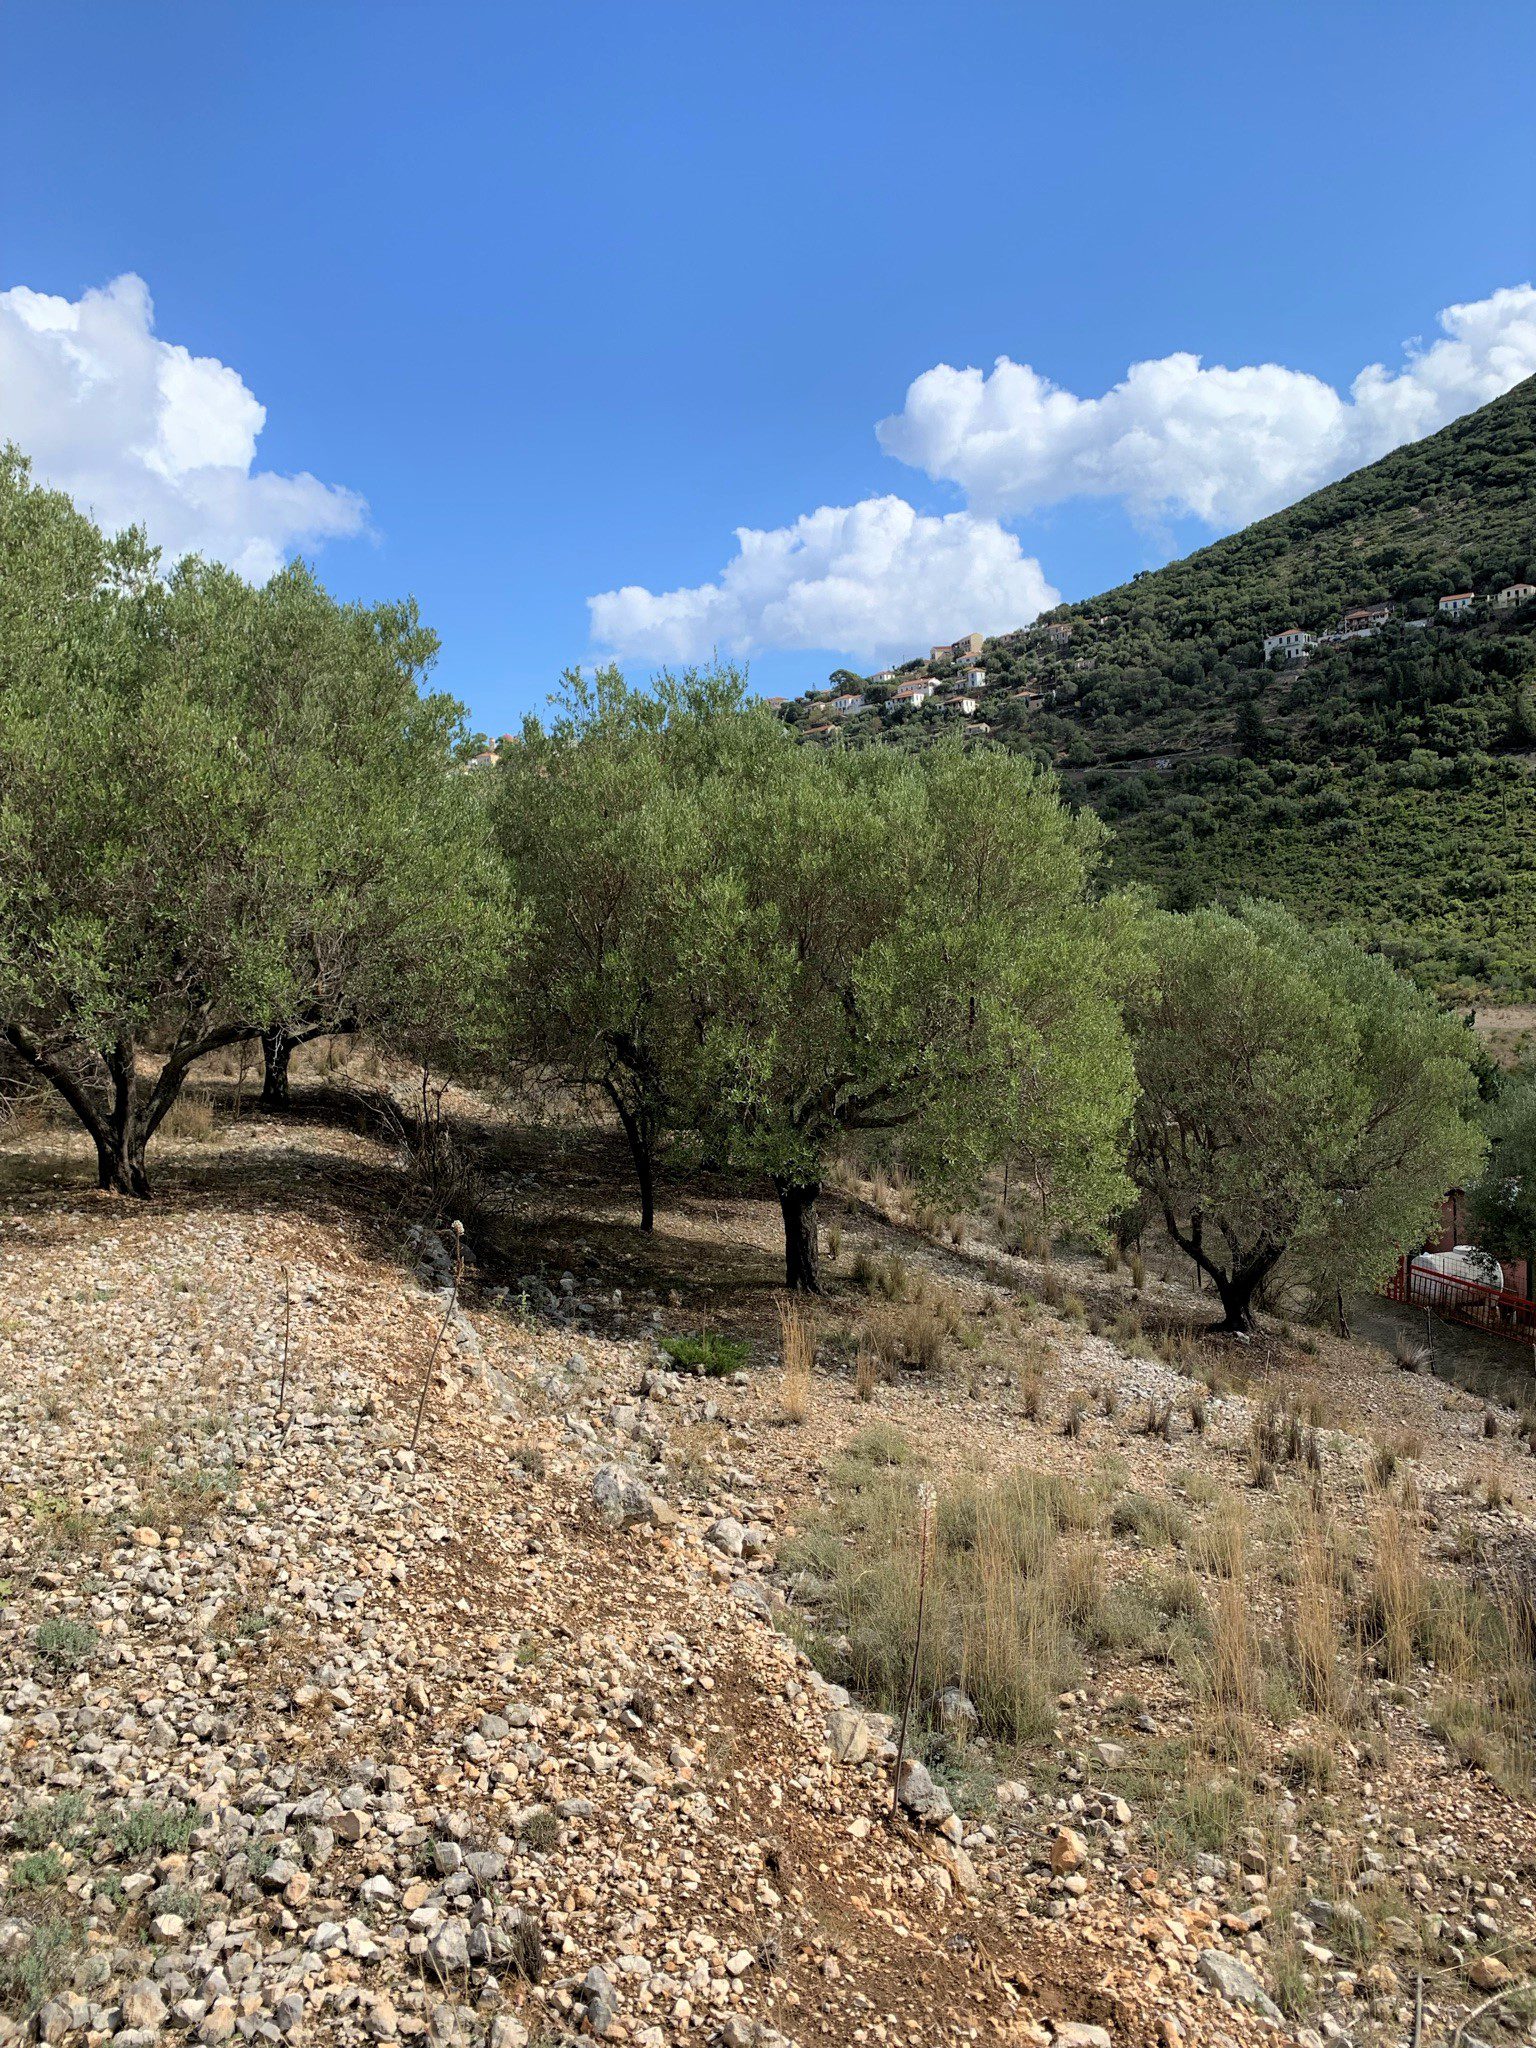 Terrain of land for sale Ithaca Greece, Stavros